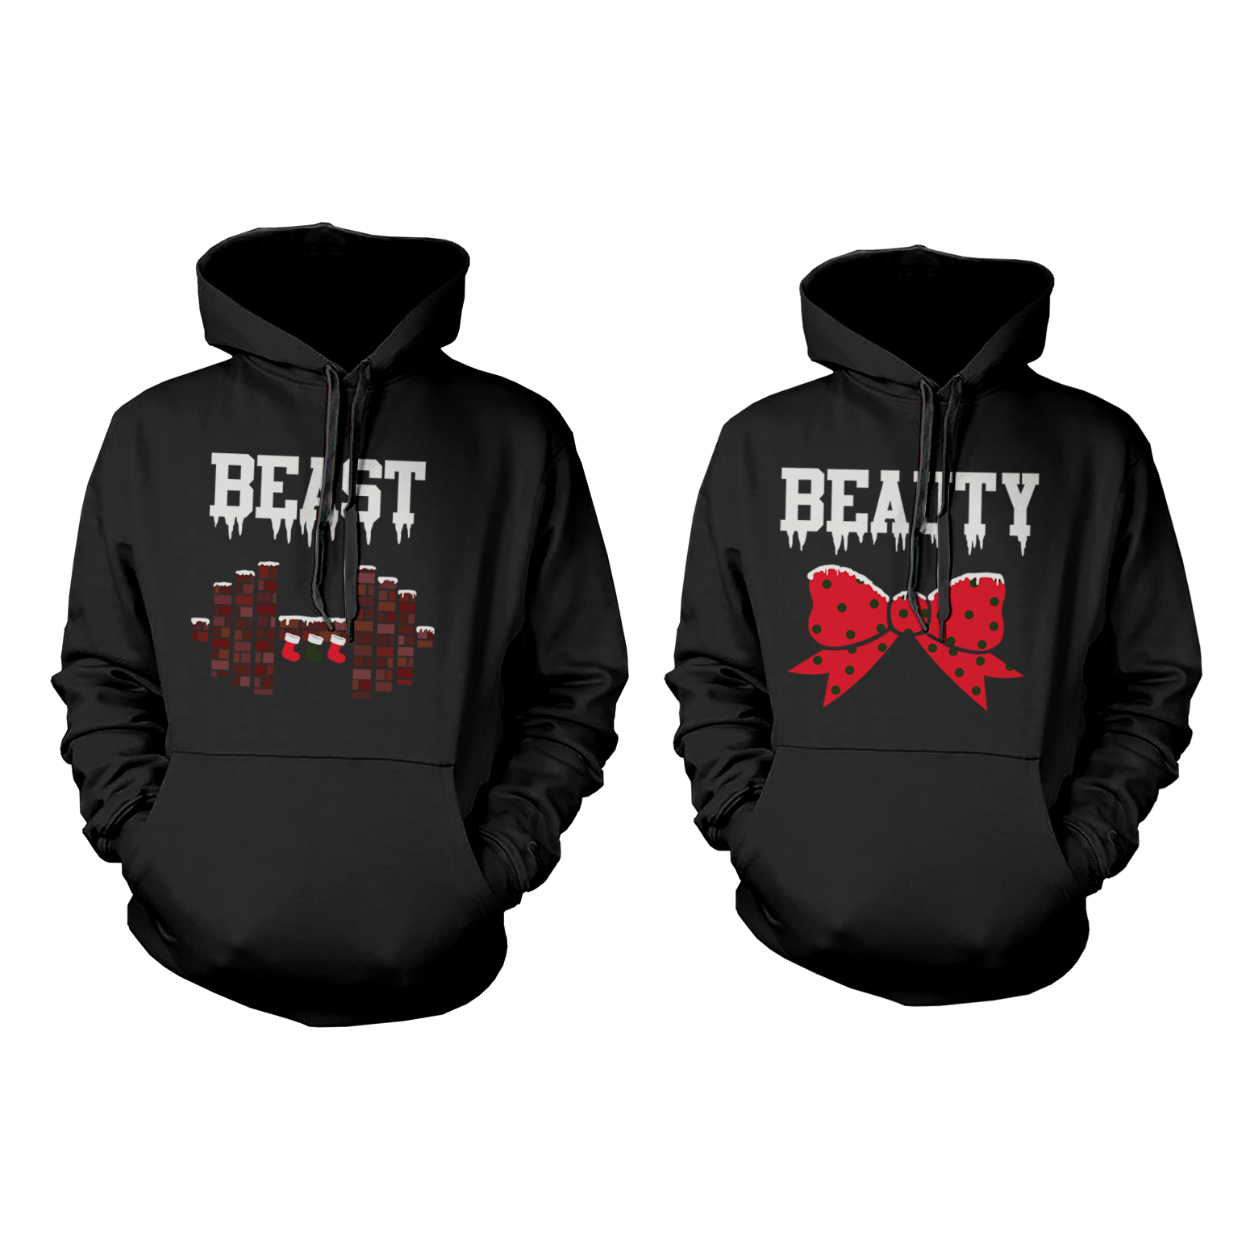 Beauty And Beast Graphic Hoodie For Couples